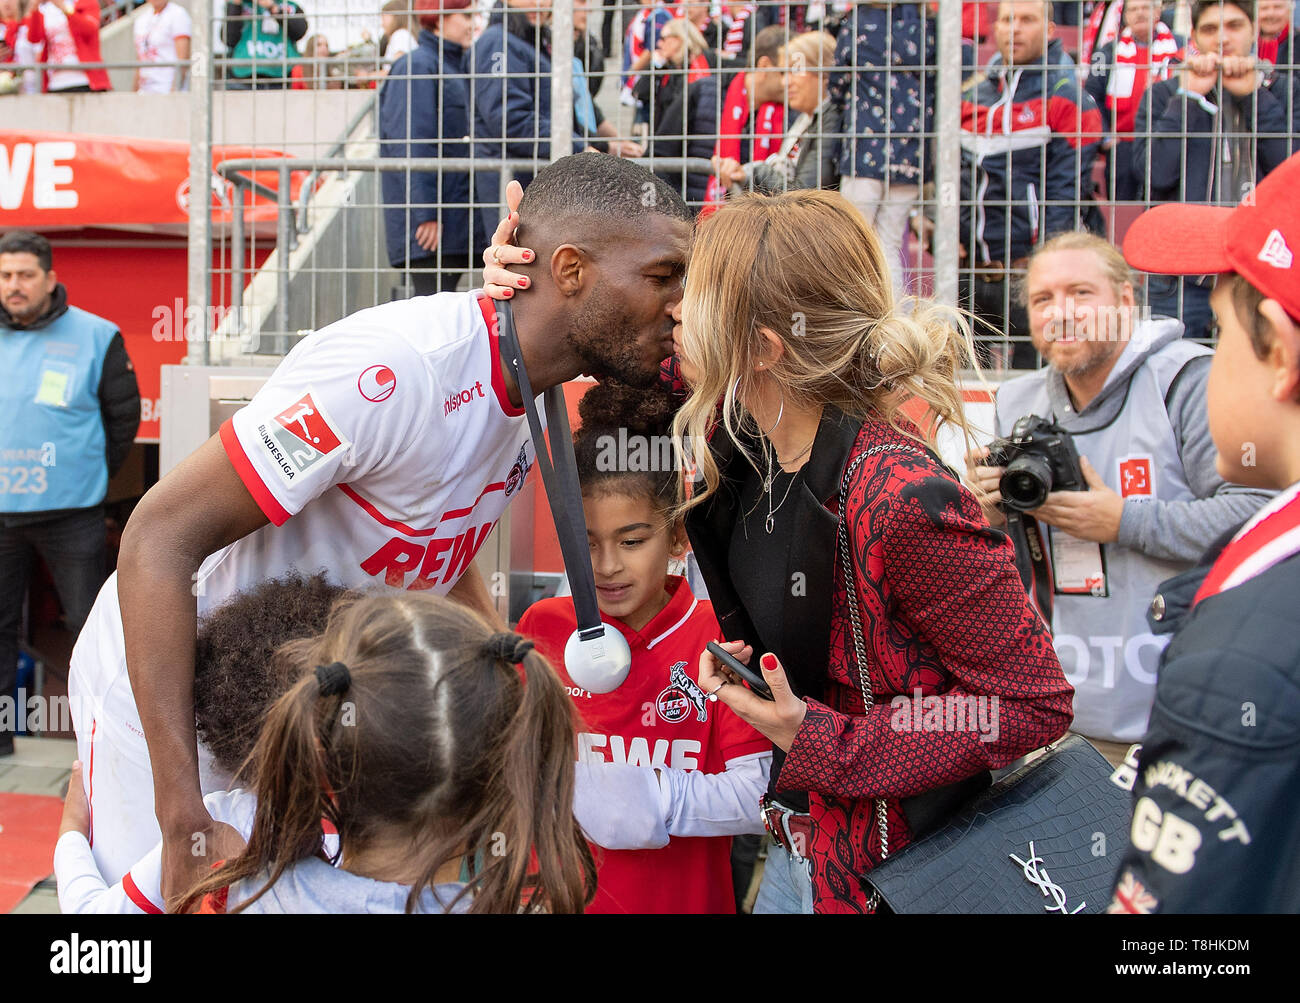 Anthony MODESTE (K) kisses his wife, kiss, award ceremony FC Cologne  Champion of the 2. Bundesliga. Soccer 2. Bundesliga, 33. matchday, FC  Cologne (K) - Jahn Regensburg (R), on 12.05.2019 in Koeln/Germany. ##